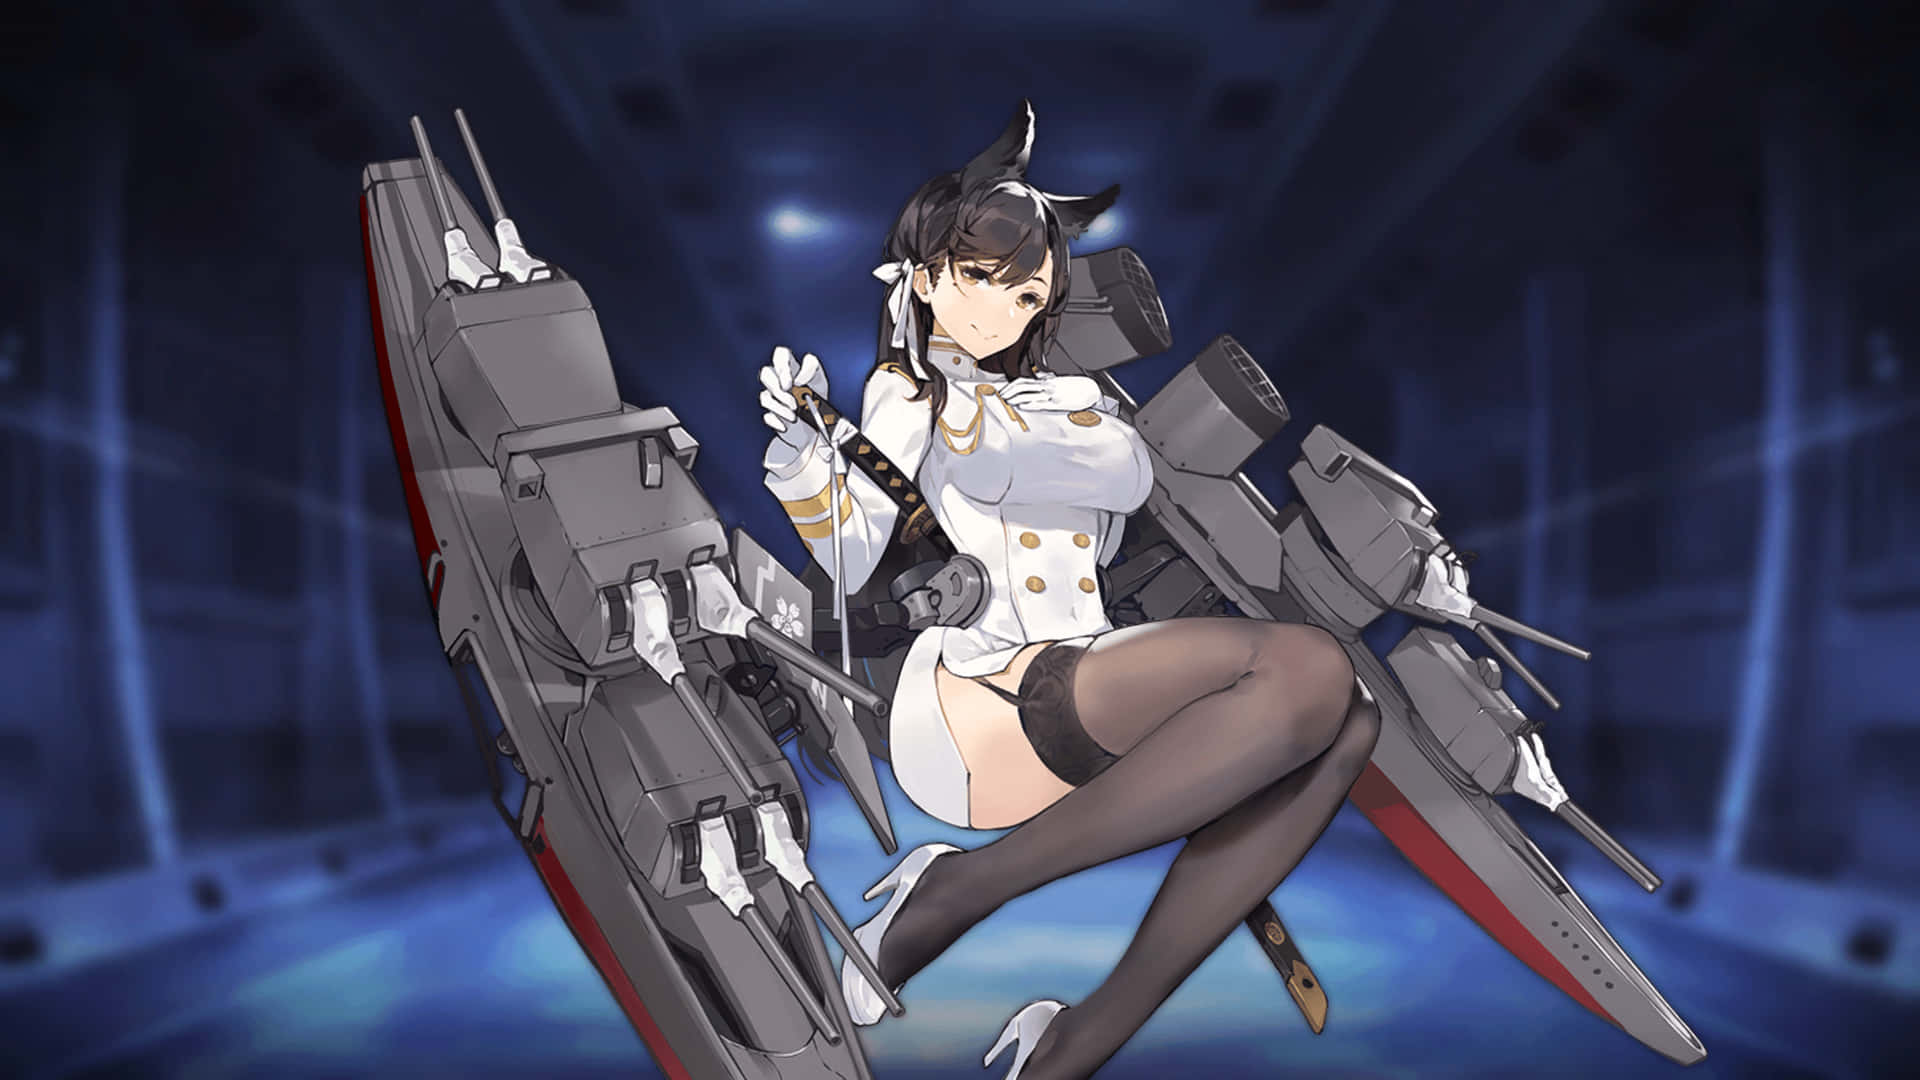 Play and Explore the High Seas with Azur Lane